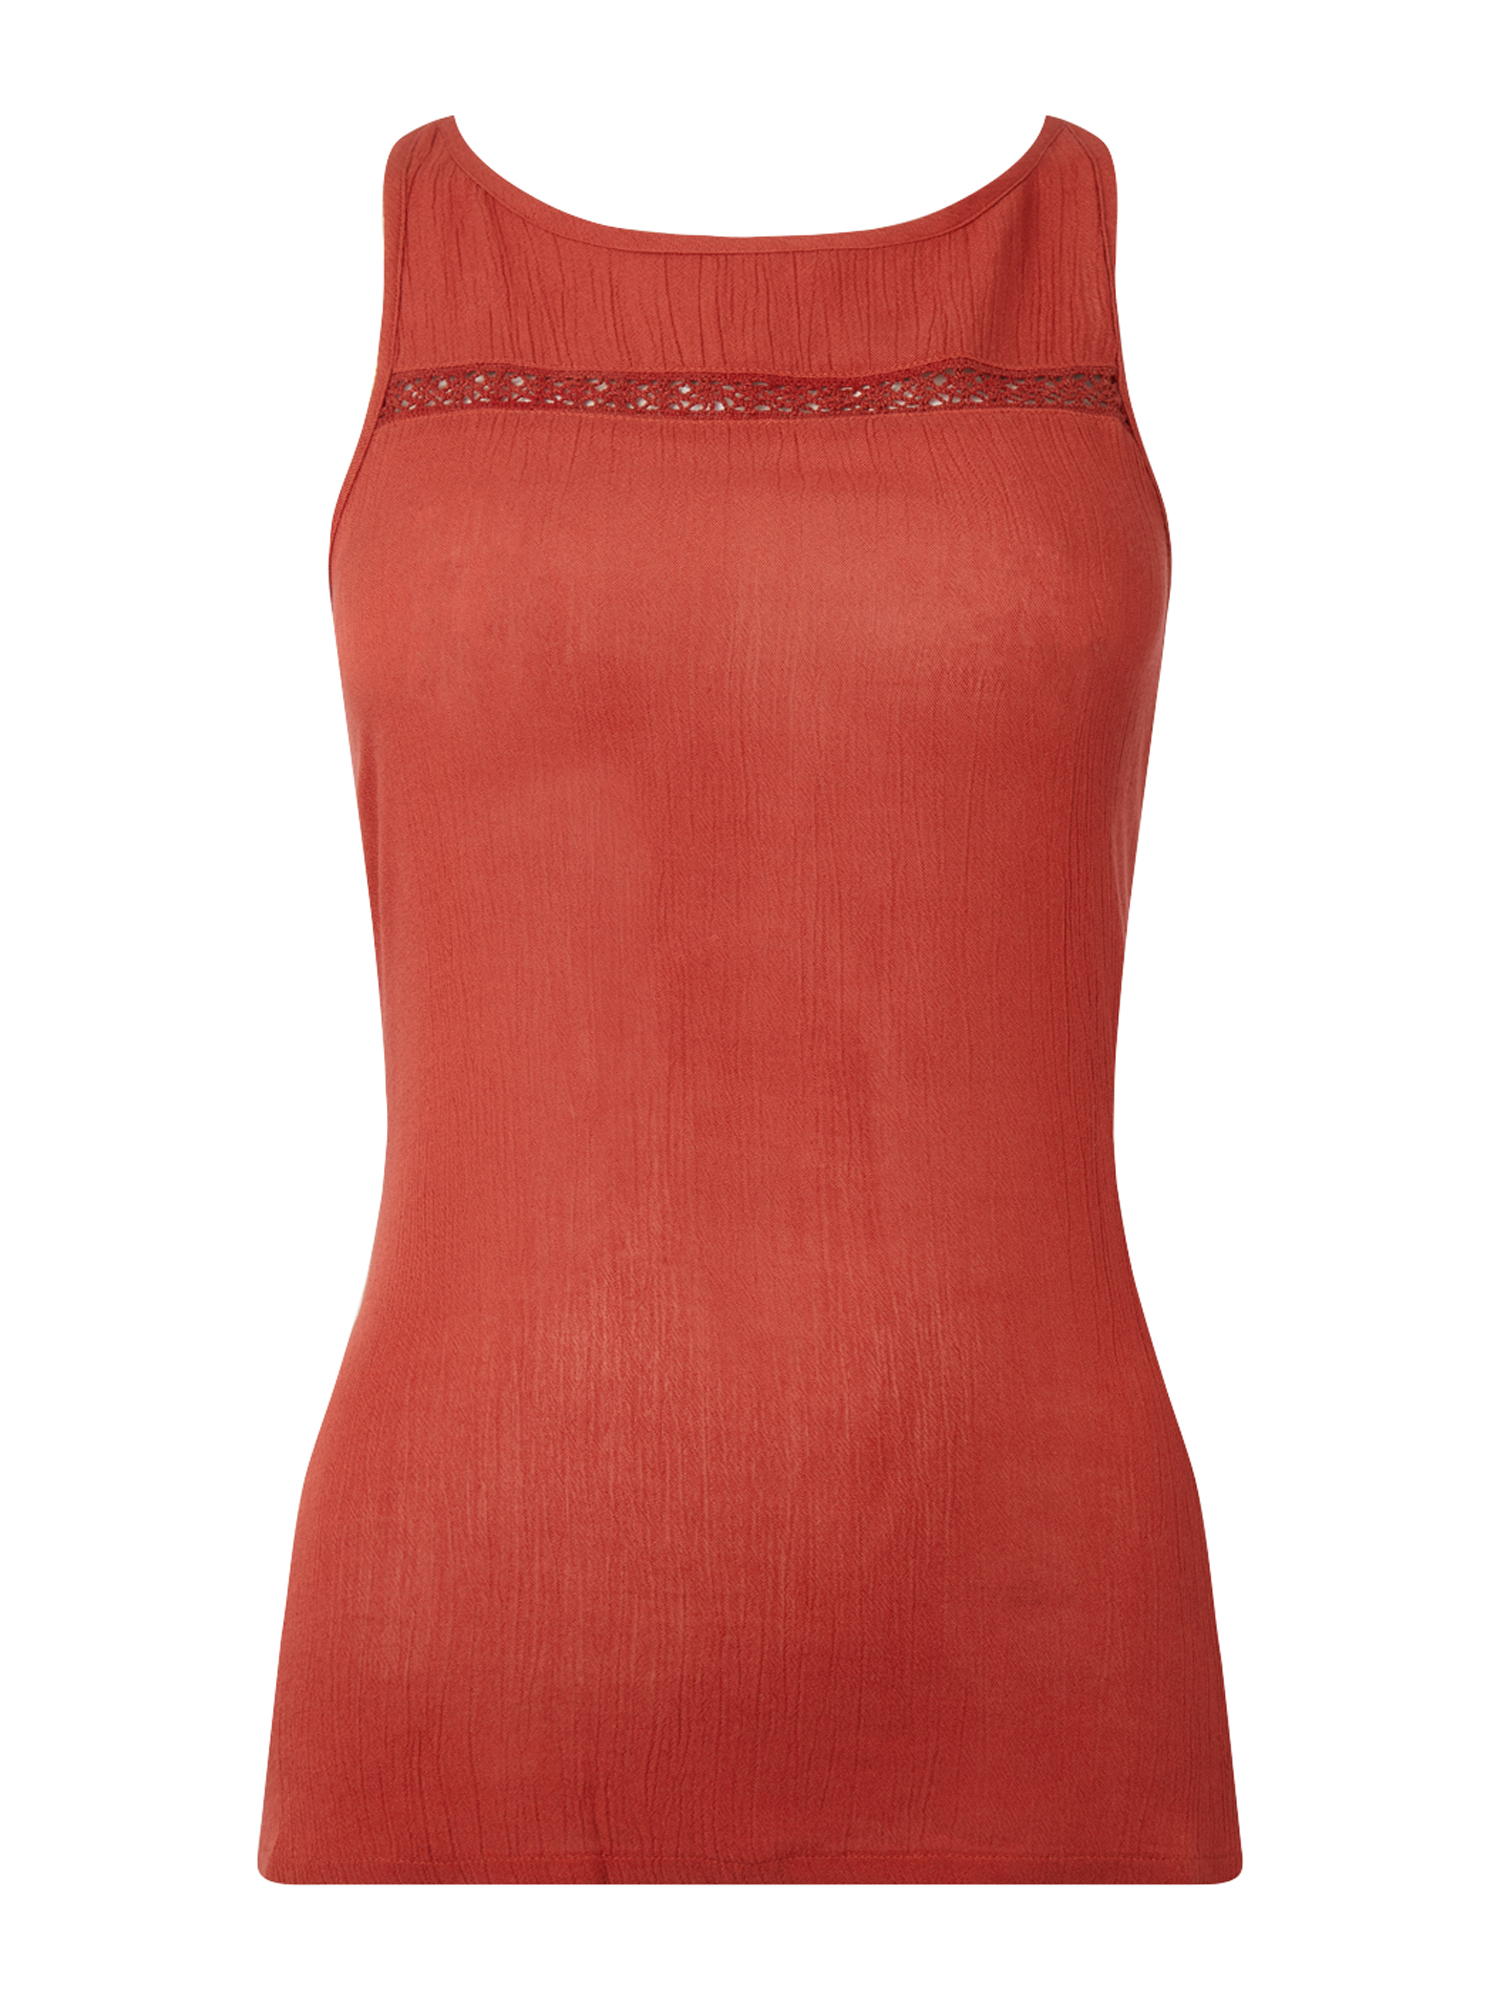 ONEILL Top DANY in Rosso 